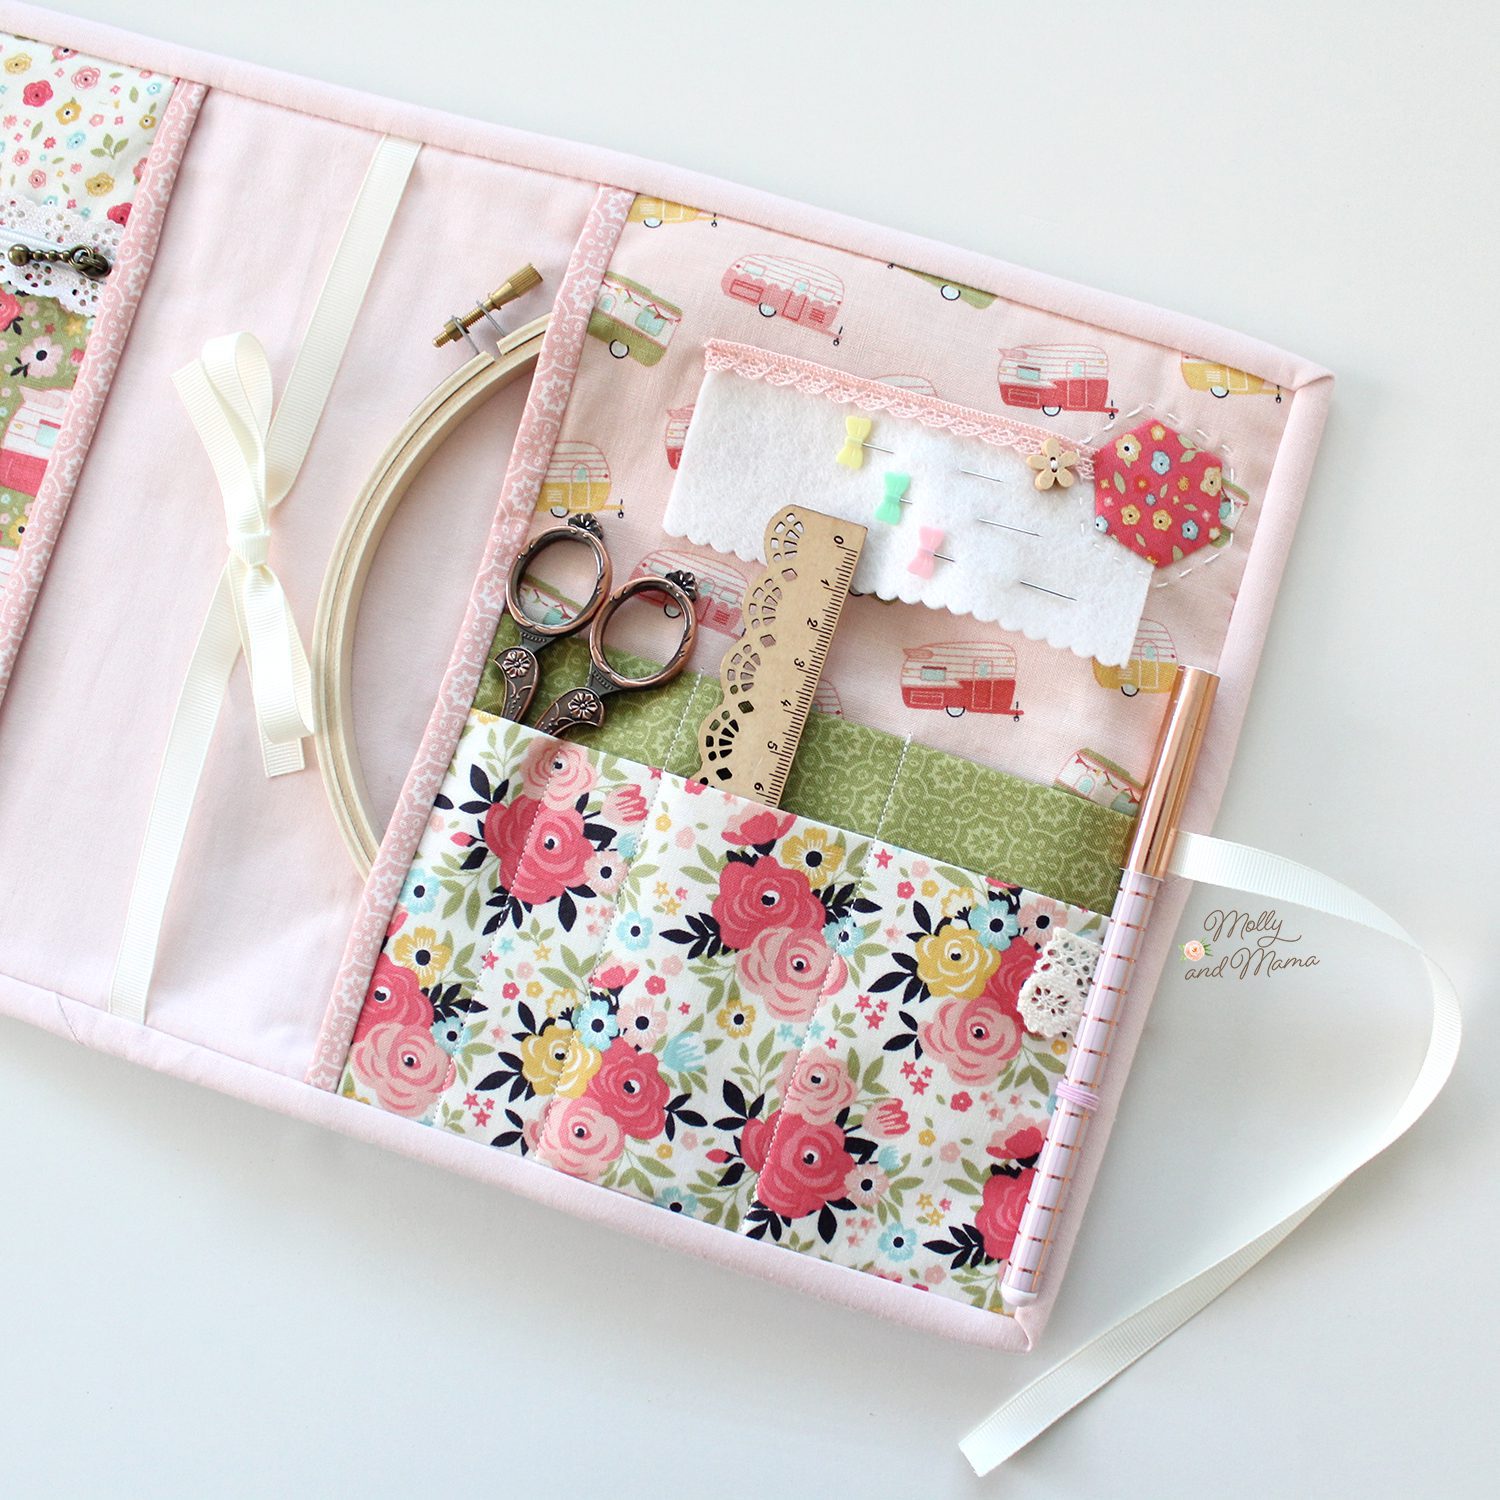 A Simple Sewing Folder in Cute Camper Fabric - Molly and Mama